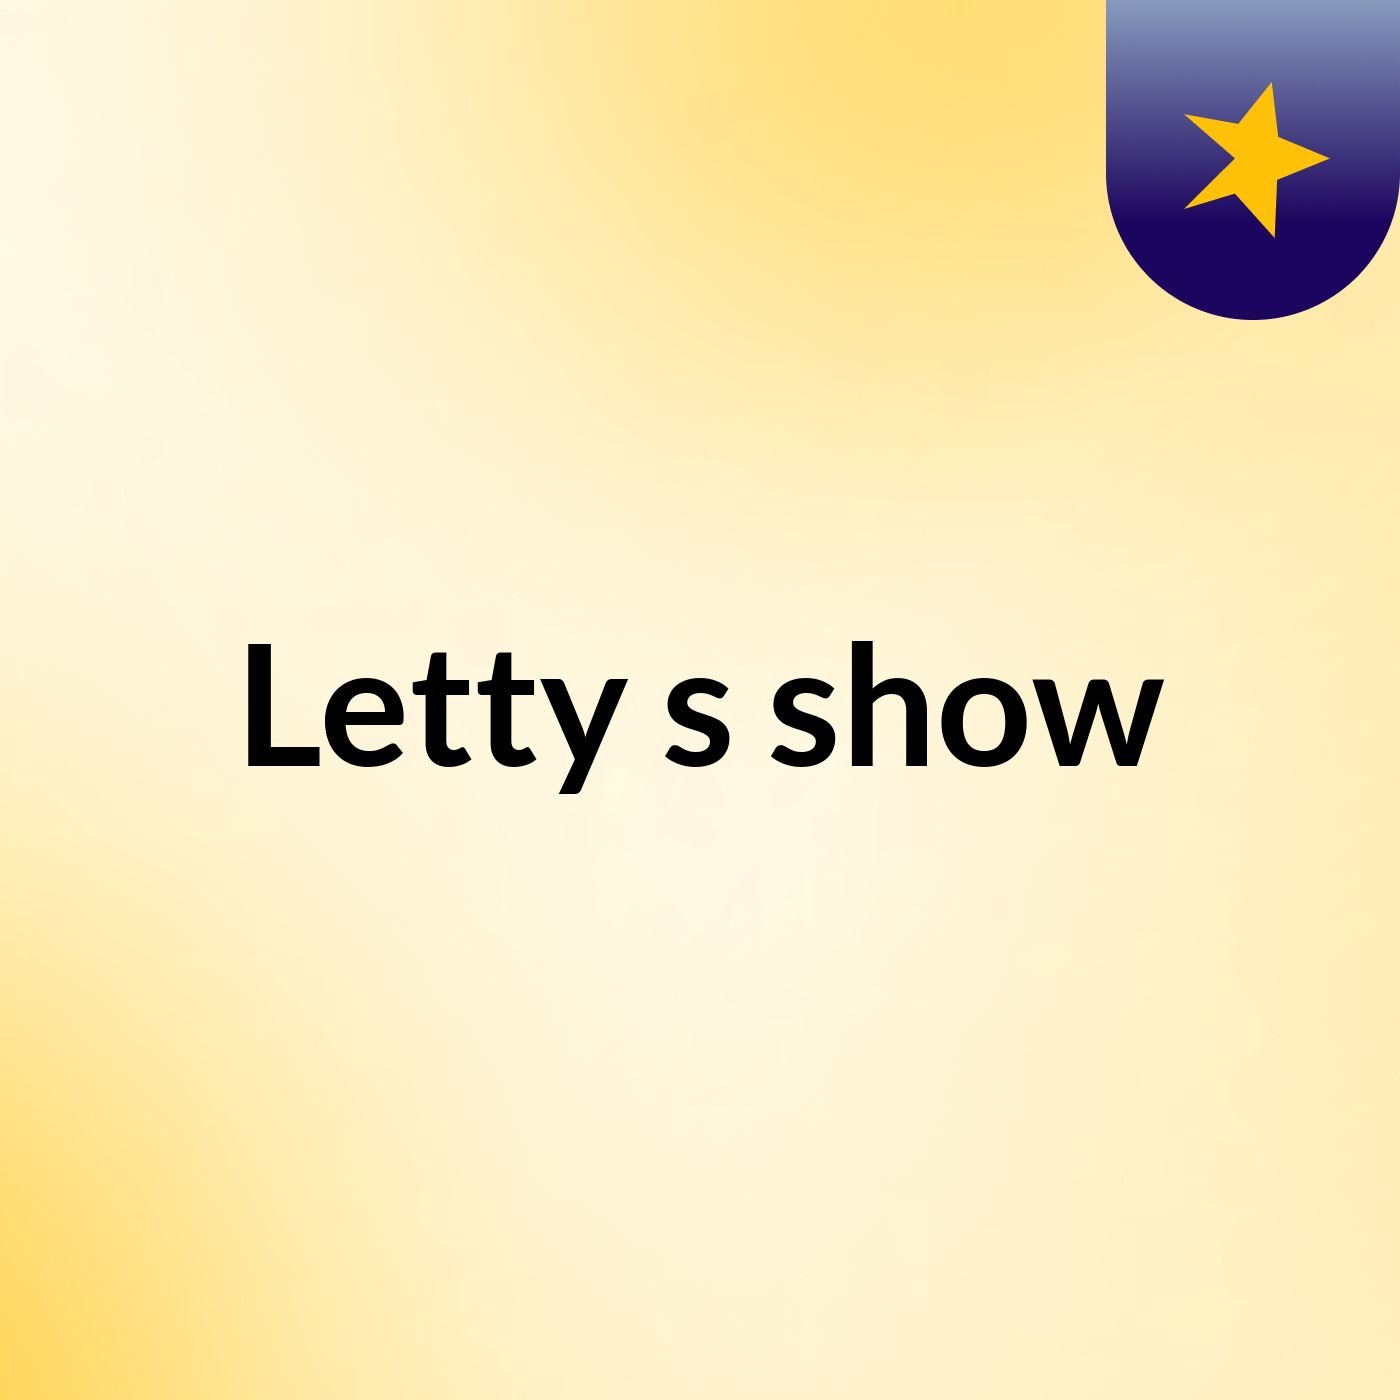 Letty's show